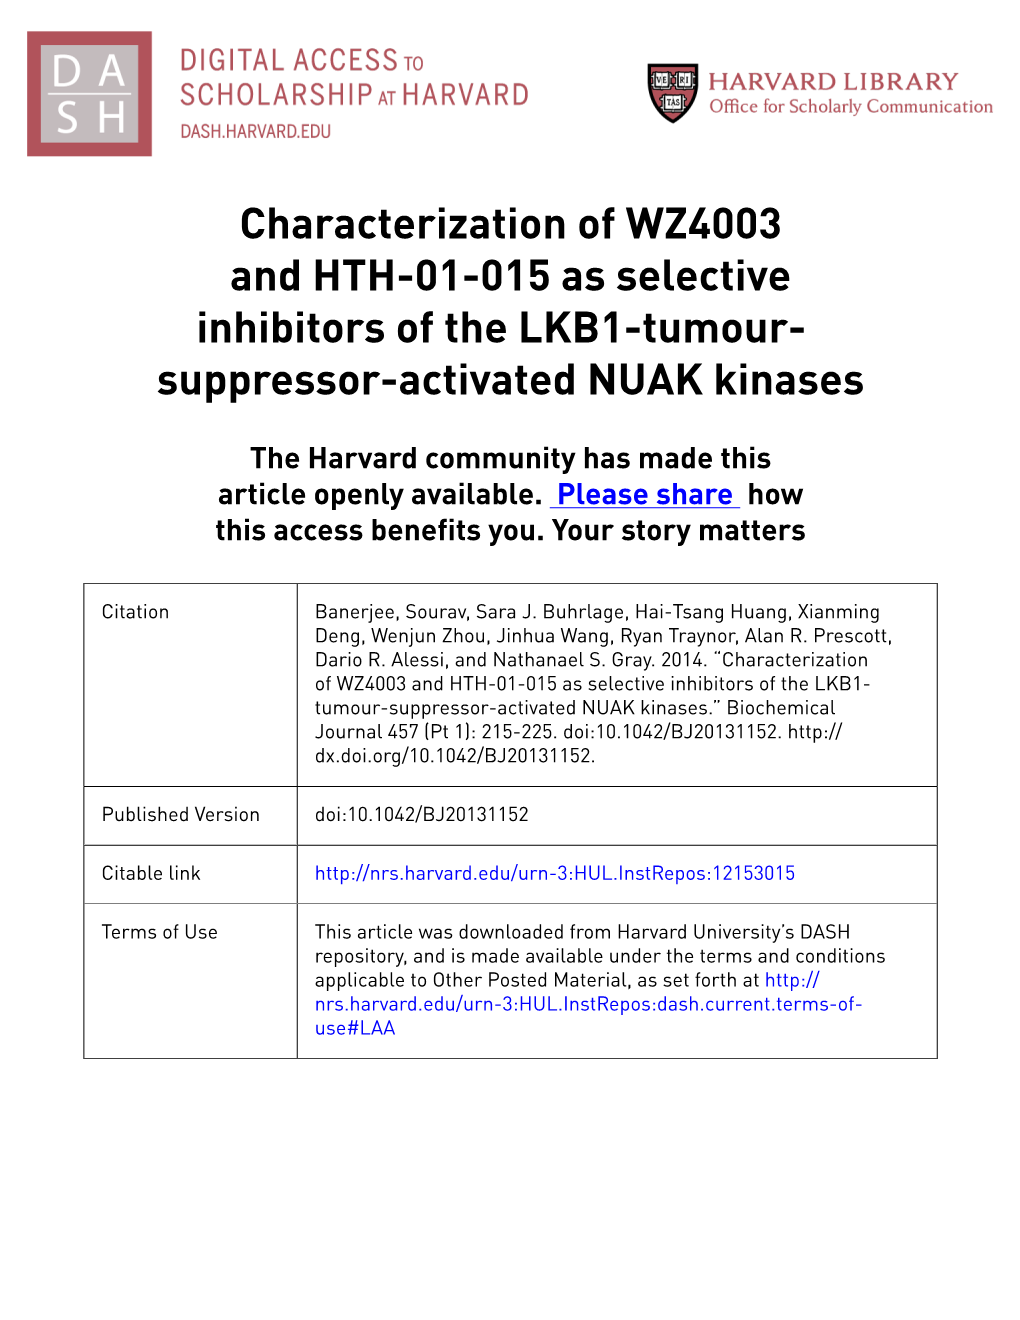 Characterization of WZ4003 and HTH-01-015 As Selective Inhibitors of the LKB1-Tumour- Suppressor-Activated NUAK Kinases